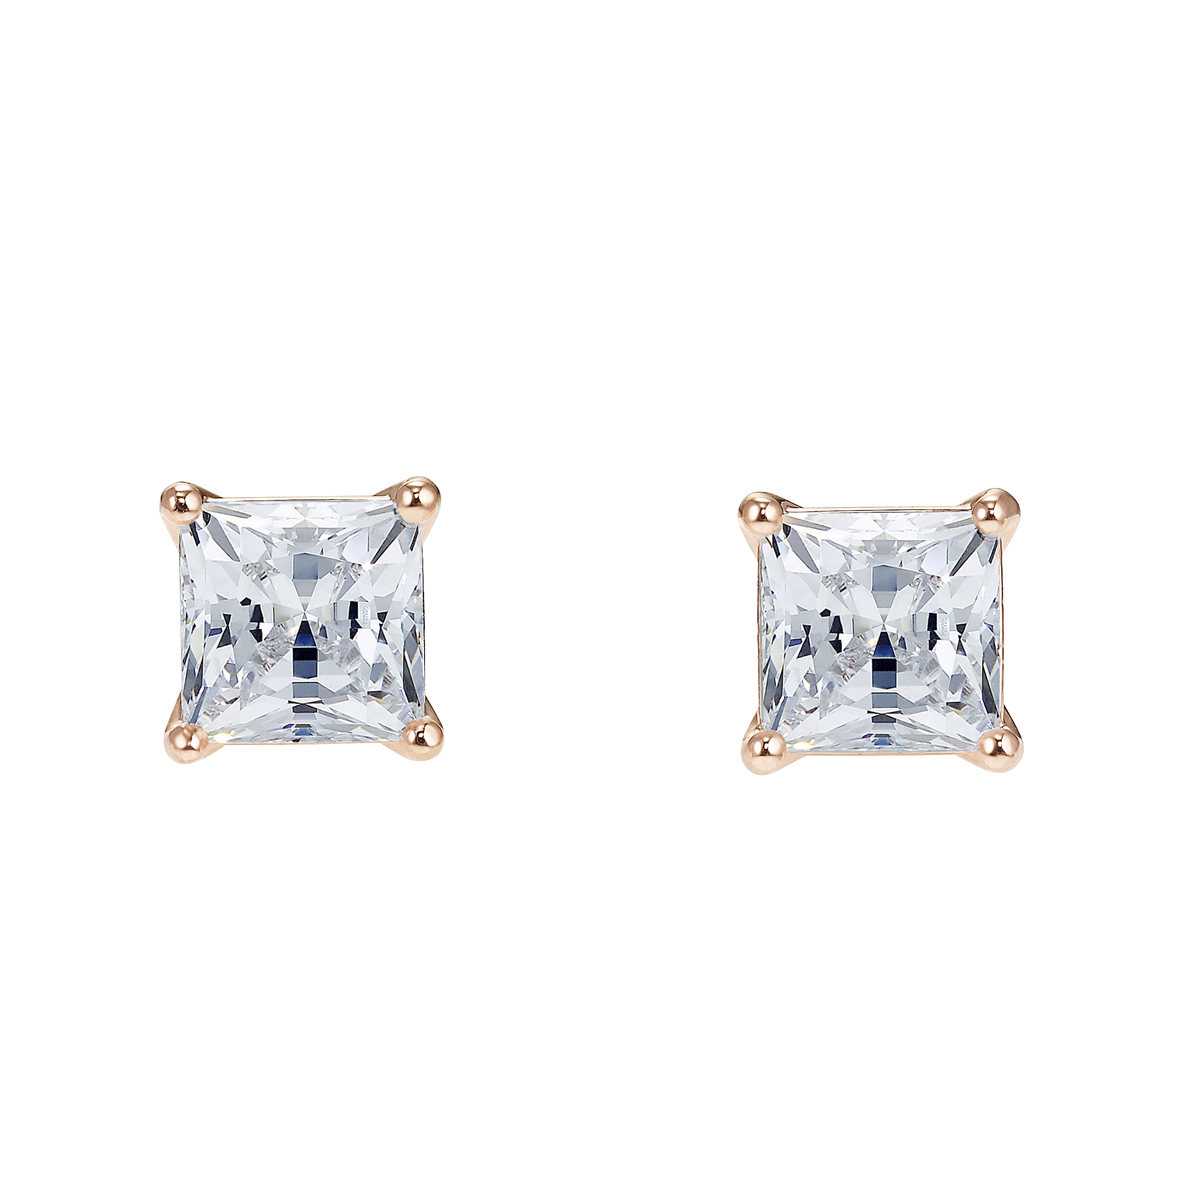 Swarovski Crystal and Rose Gold Attract Pierced Earrings, Pair